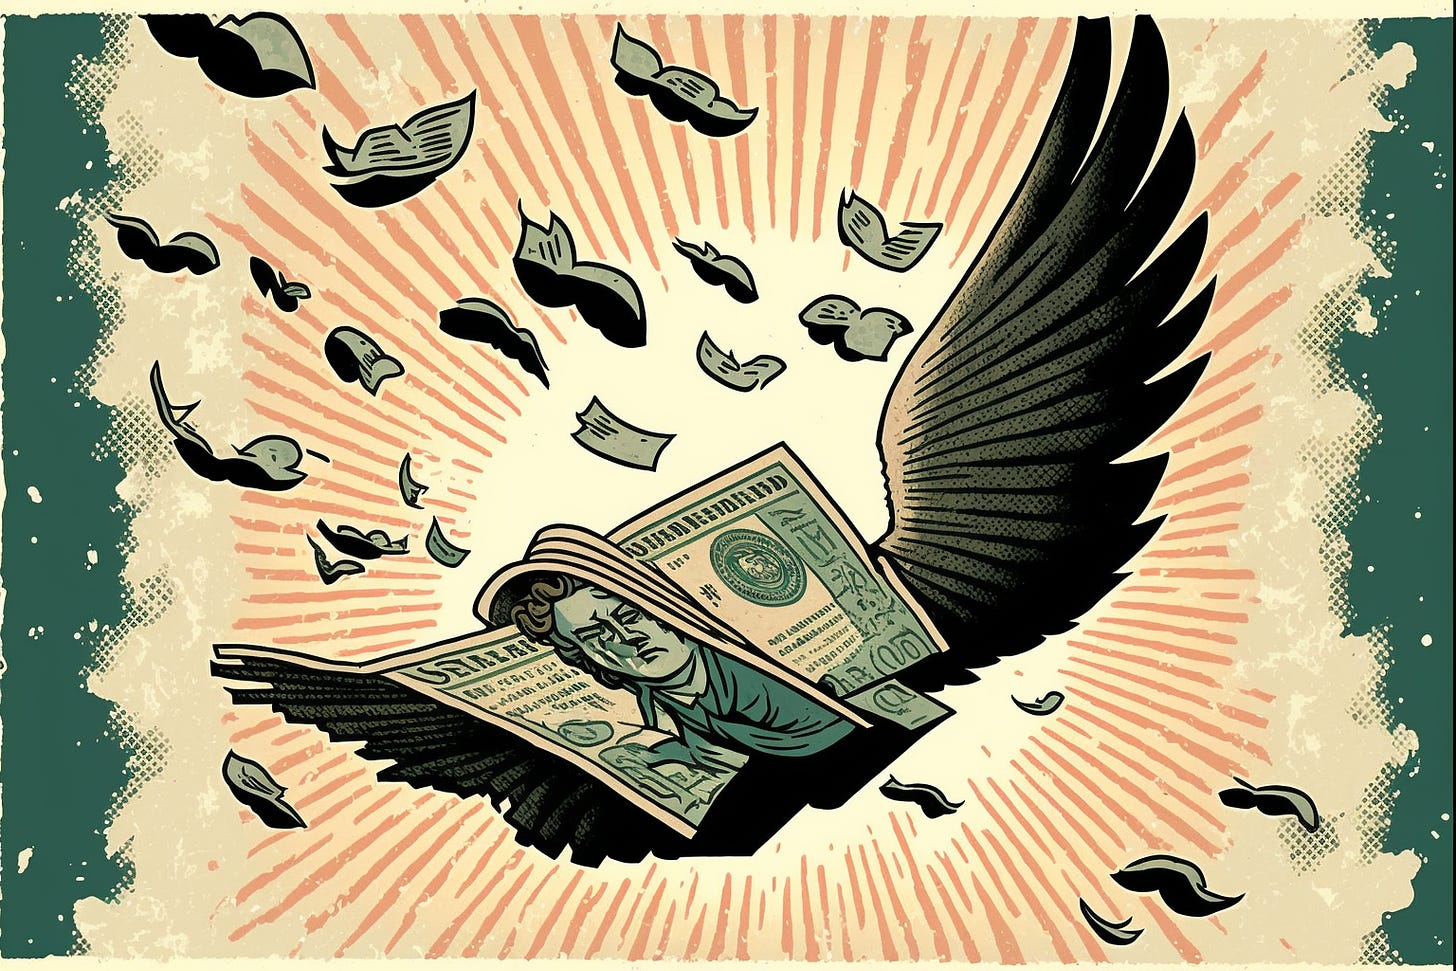 dollar bills with wings flying through the air, graphic novel